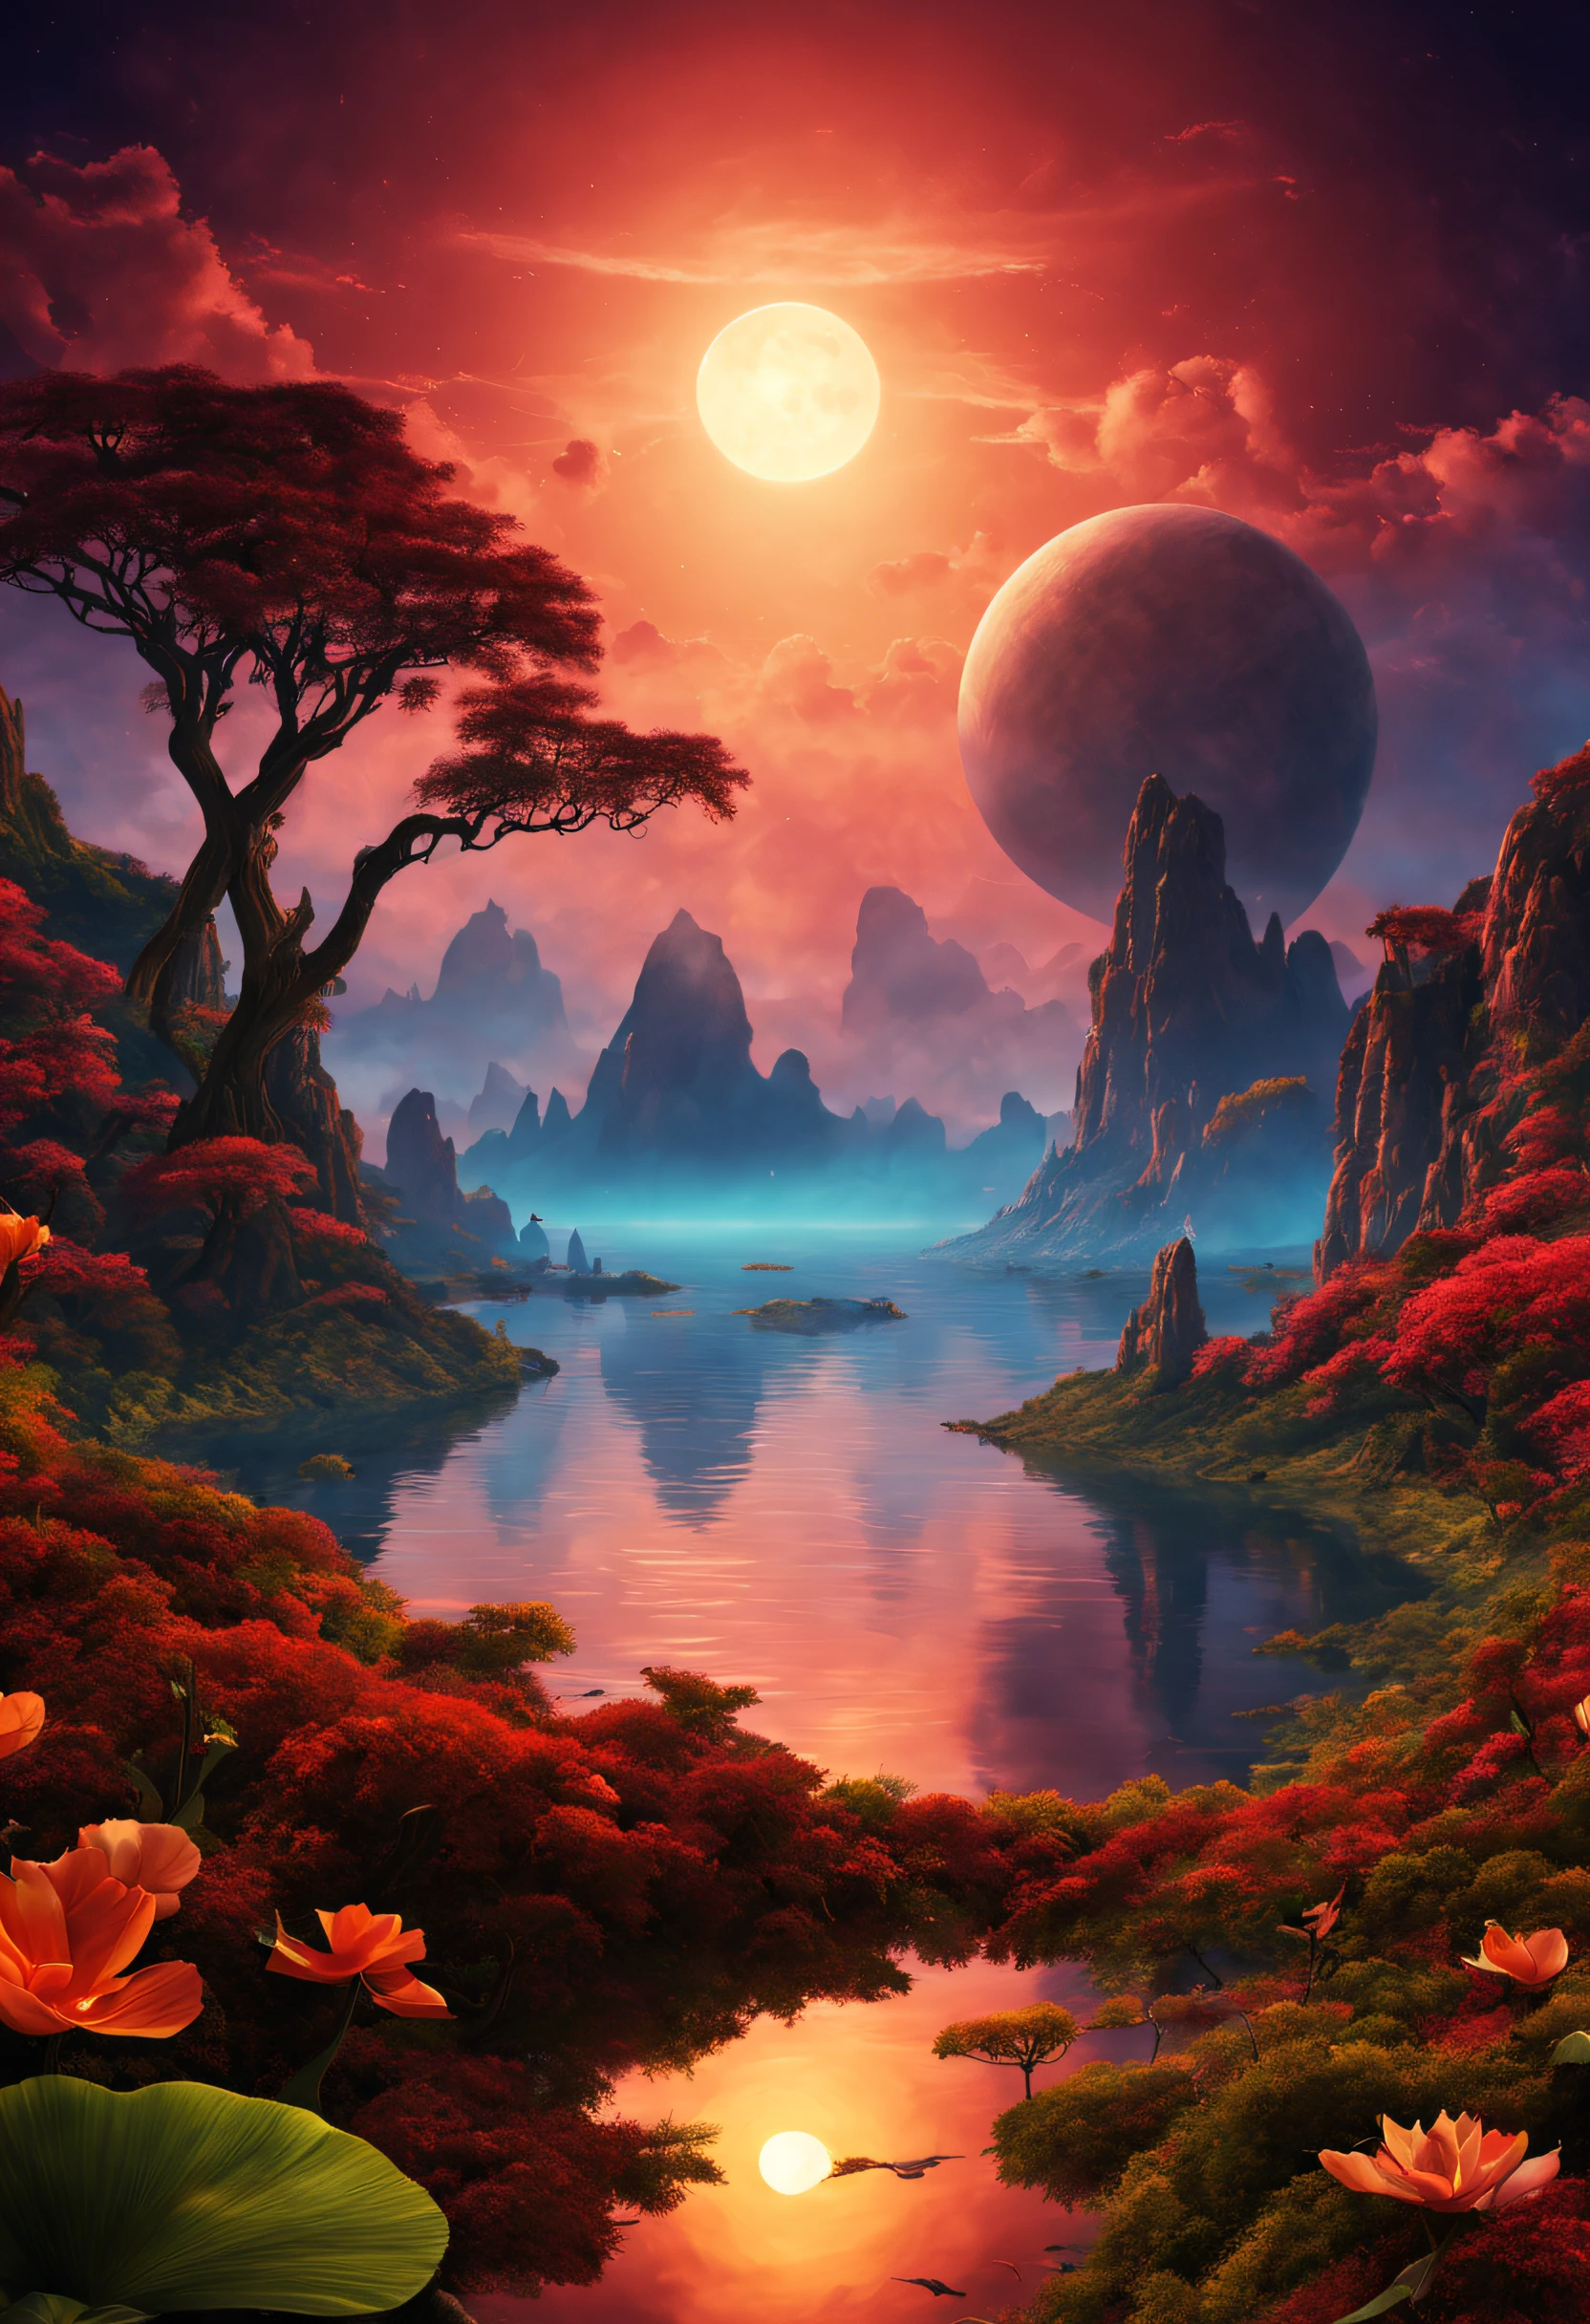 A beautifull magnificent imaginary landscape on an exotic planet with a double sunset and an extraordinary